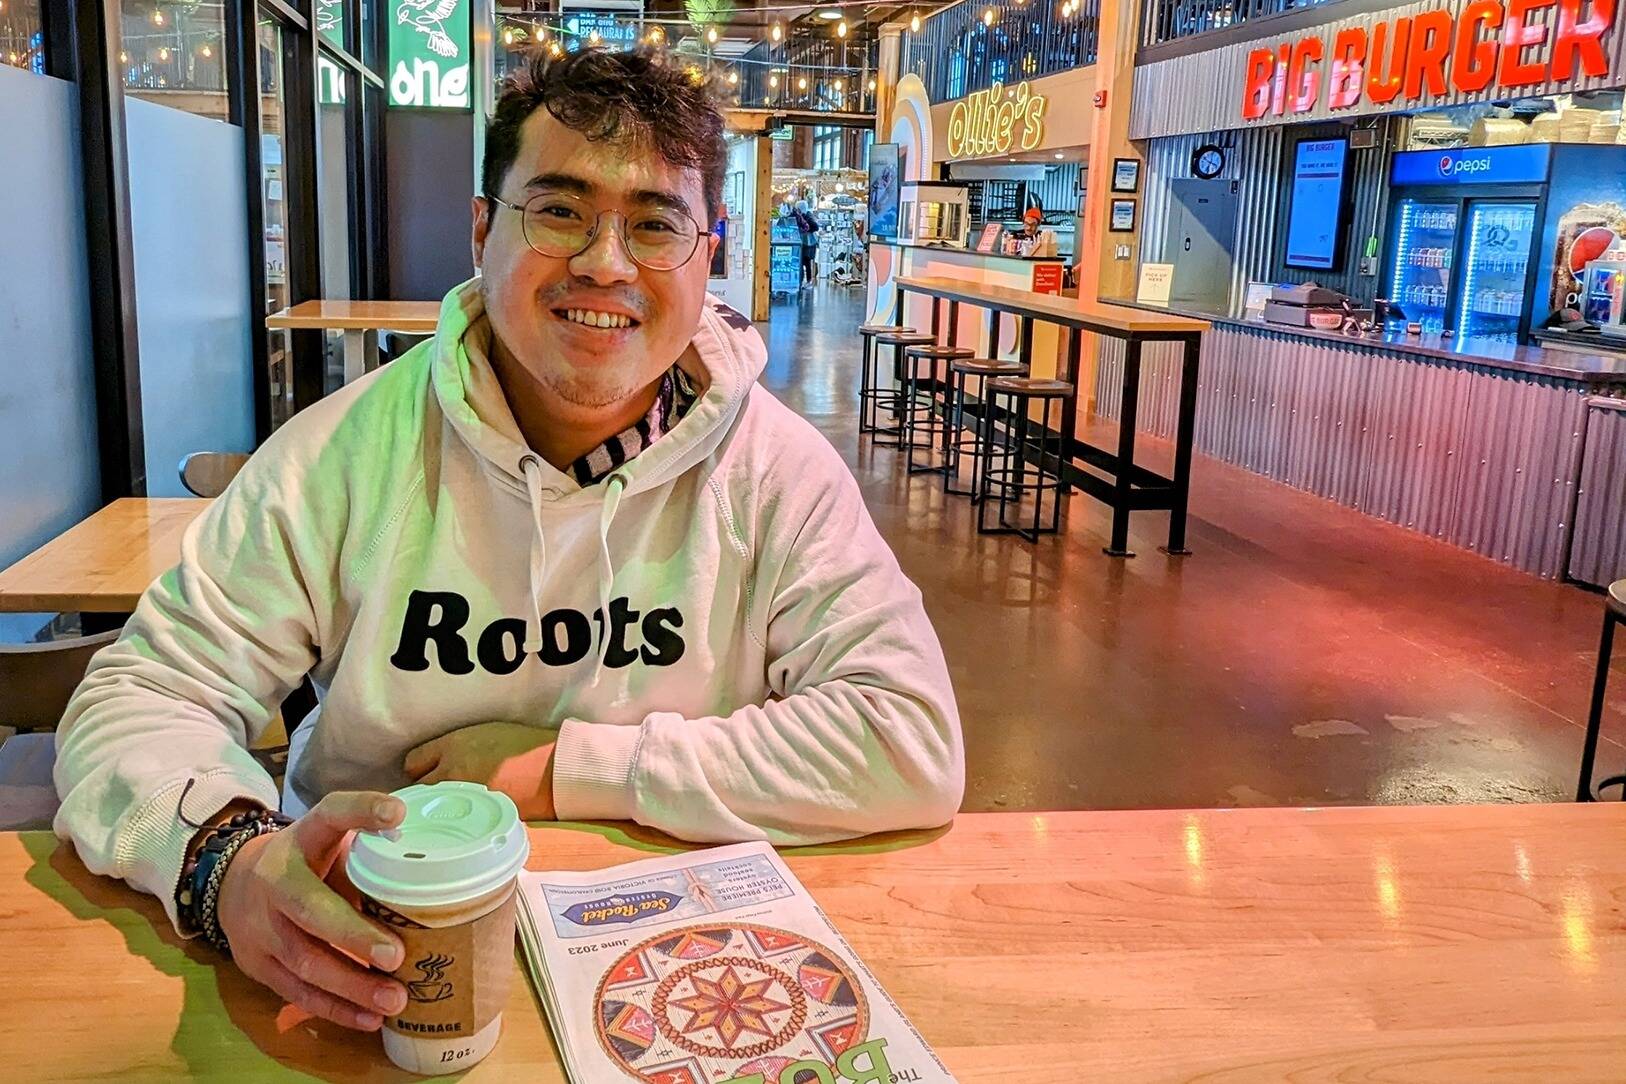 Alan Gonzales is a Filipino immigrant who moved to Canada, settling in Kelowna, British Columbia. (Photo courtesy Alan Gonzales)